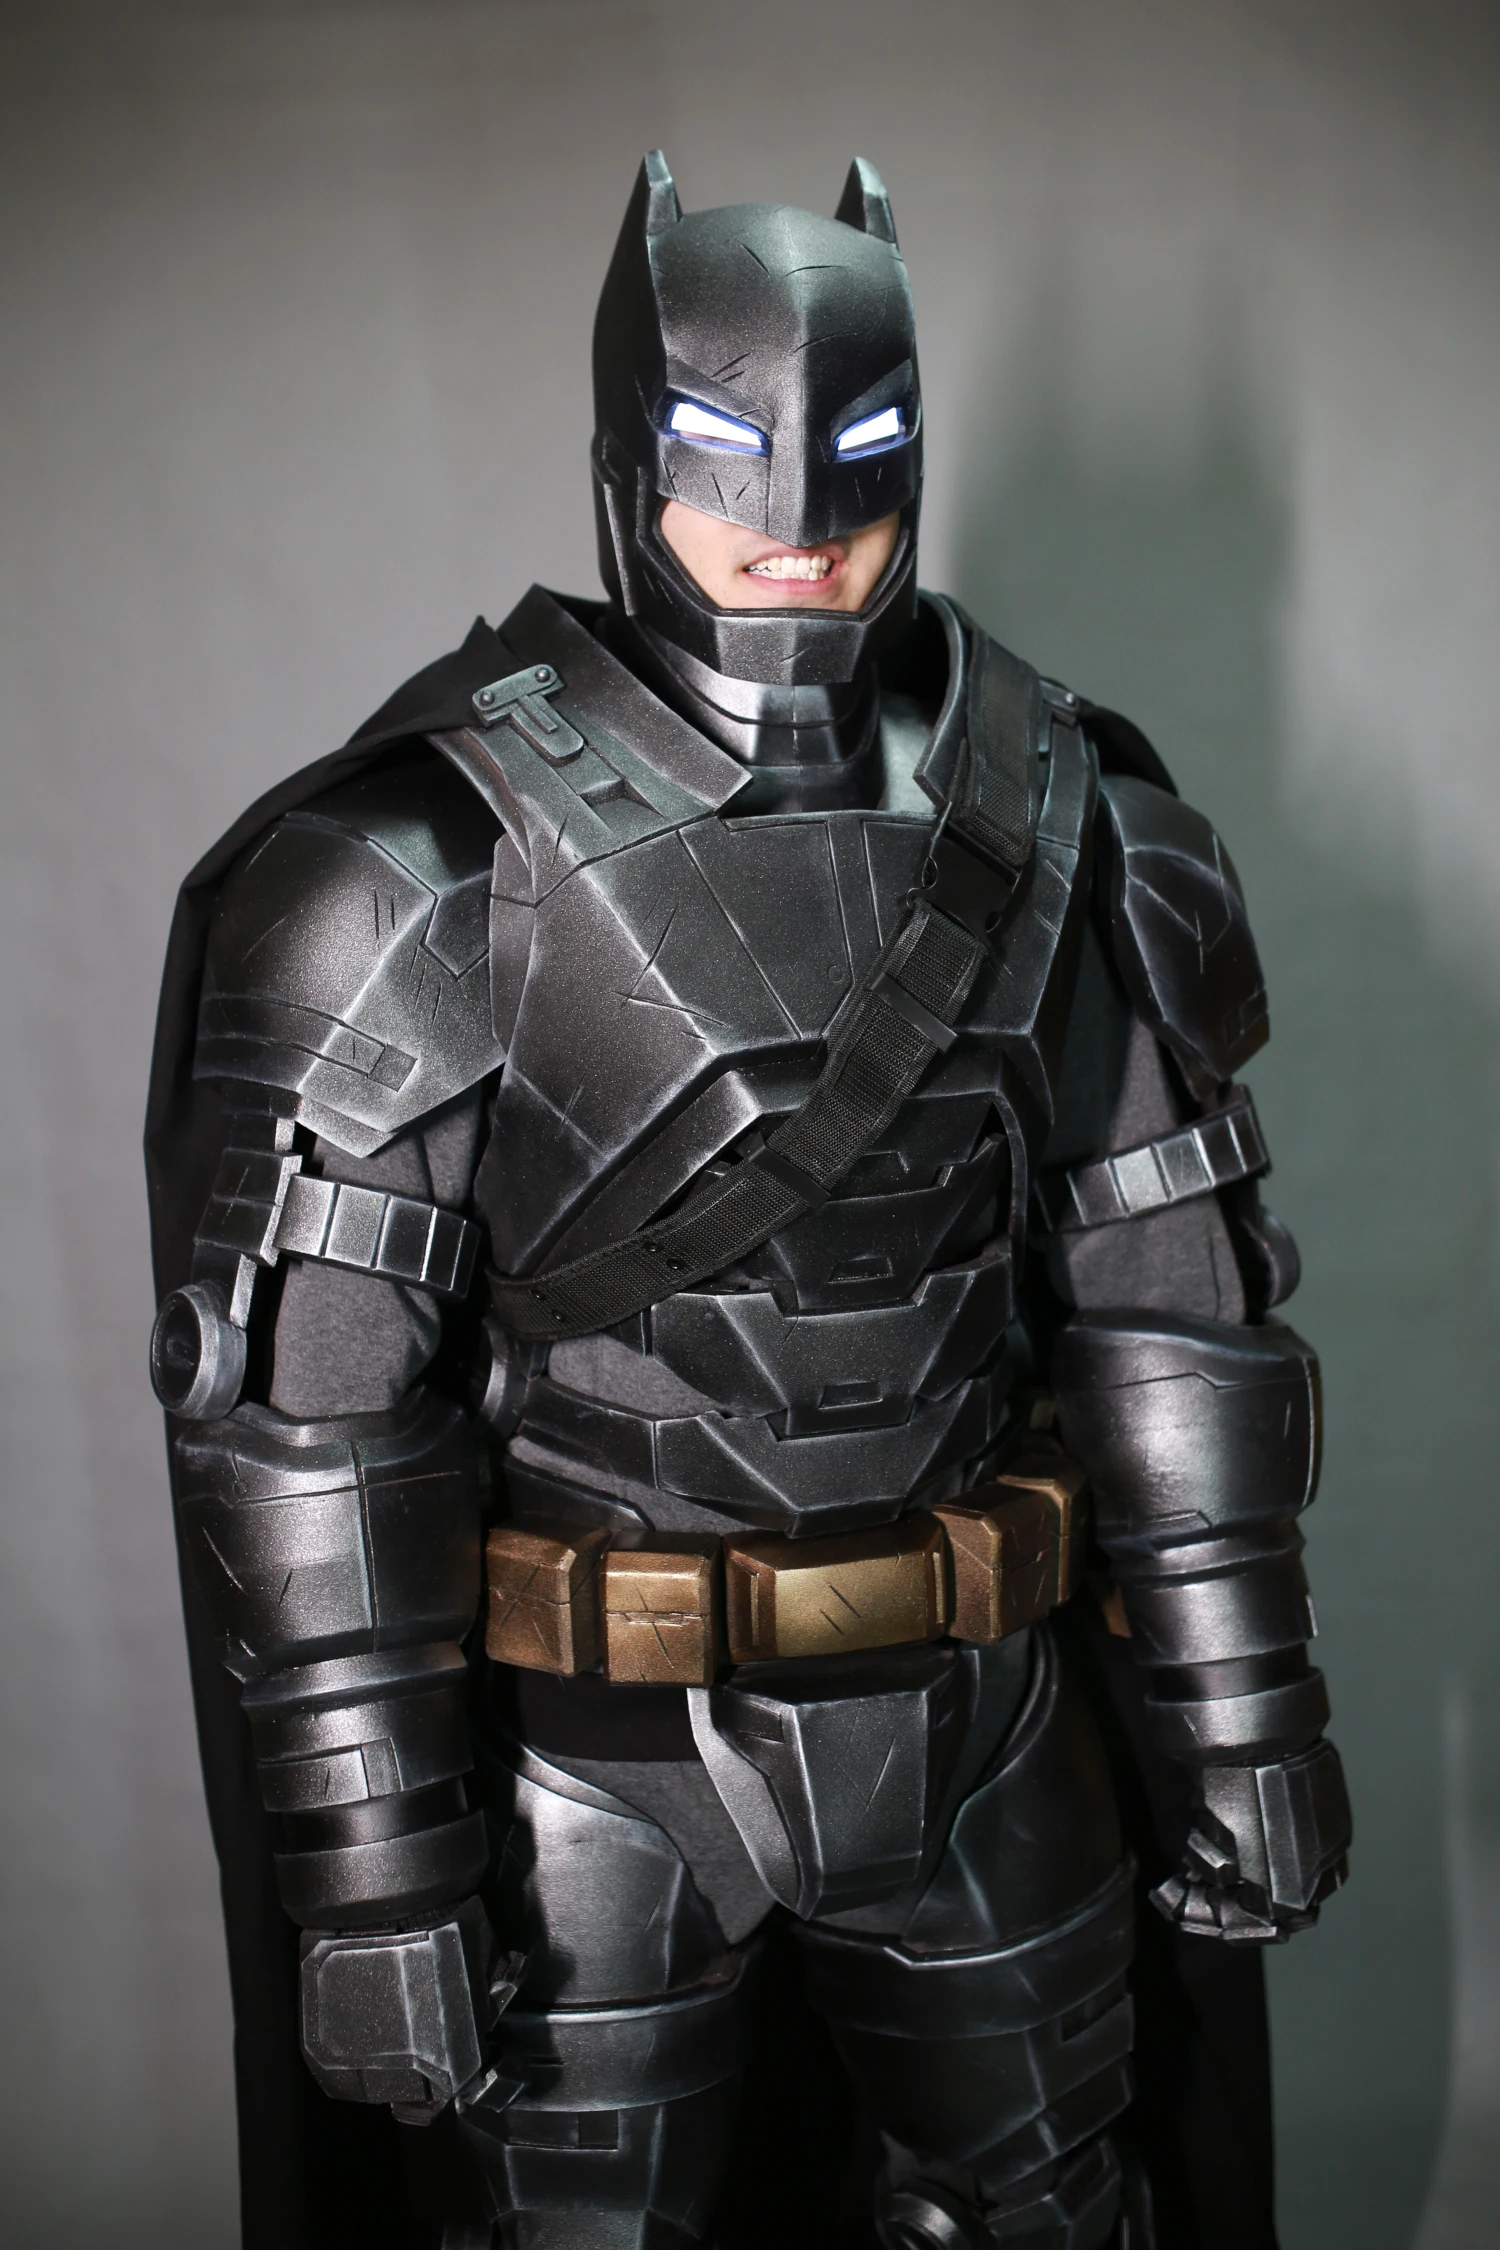 Life-size Realistic Robot Costumes B-a-t- M-a-n Cosplay Costumes Bat Man -  Buy Bat Man,Robot Costumes,Cosplay Costumes Product on 